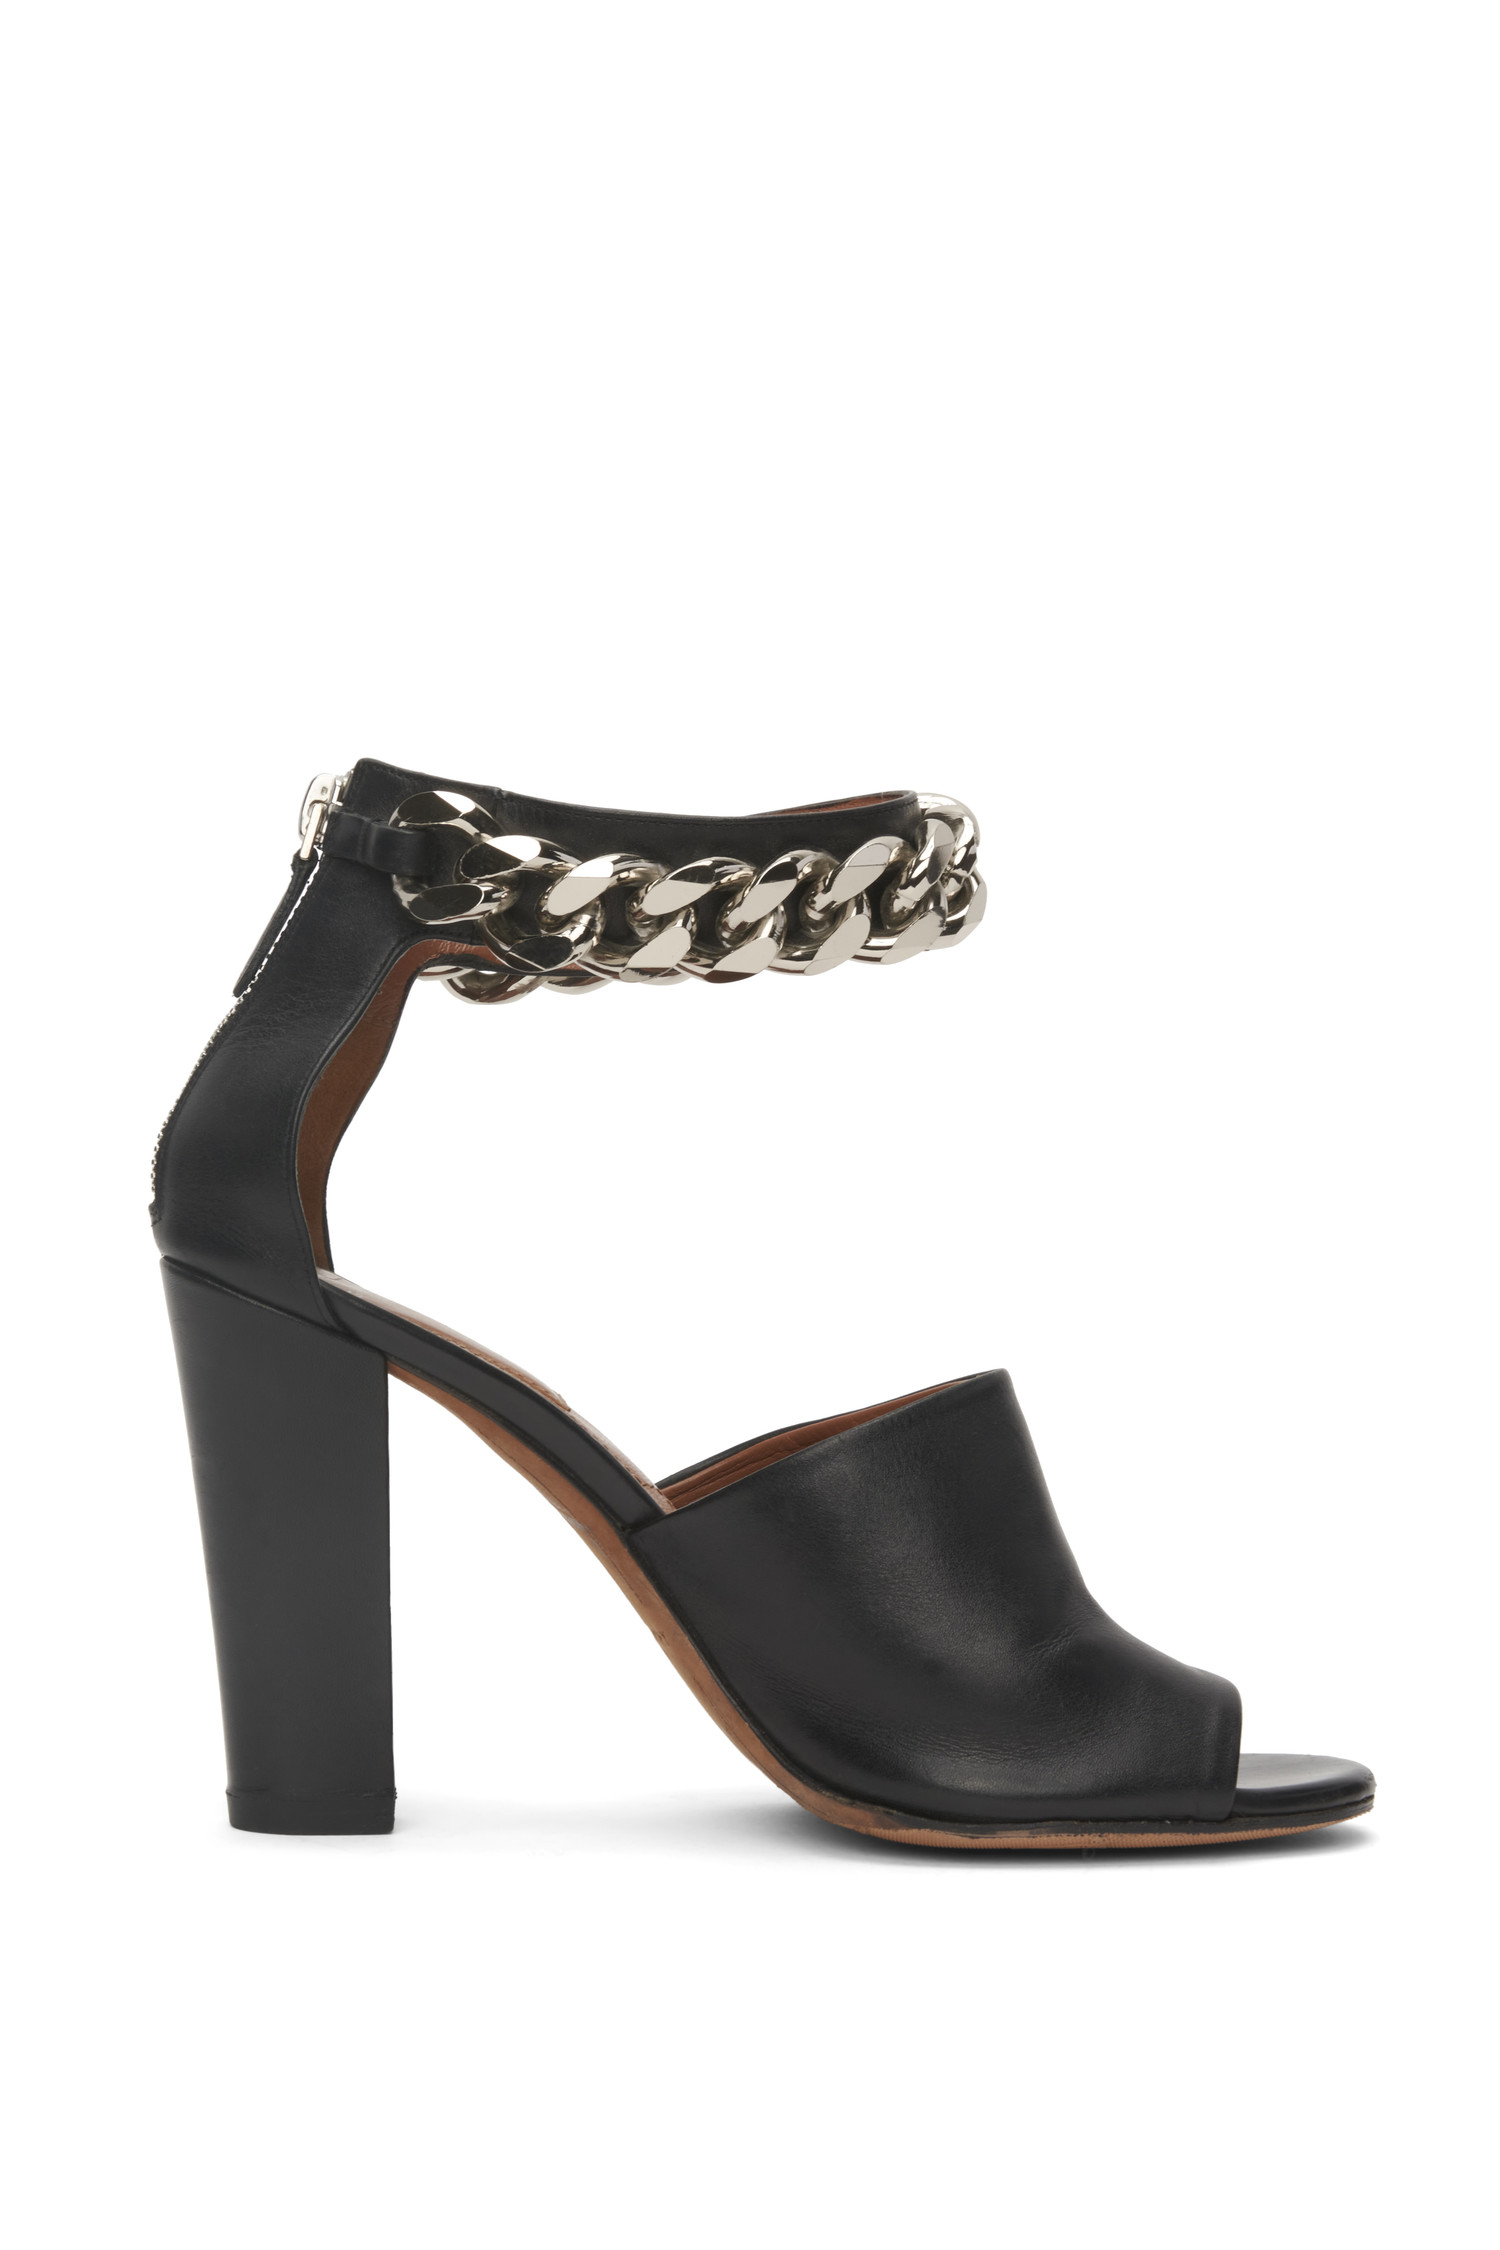 Givenchy Black Leather Chain Ankle 